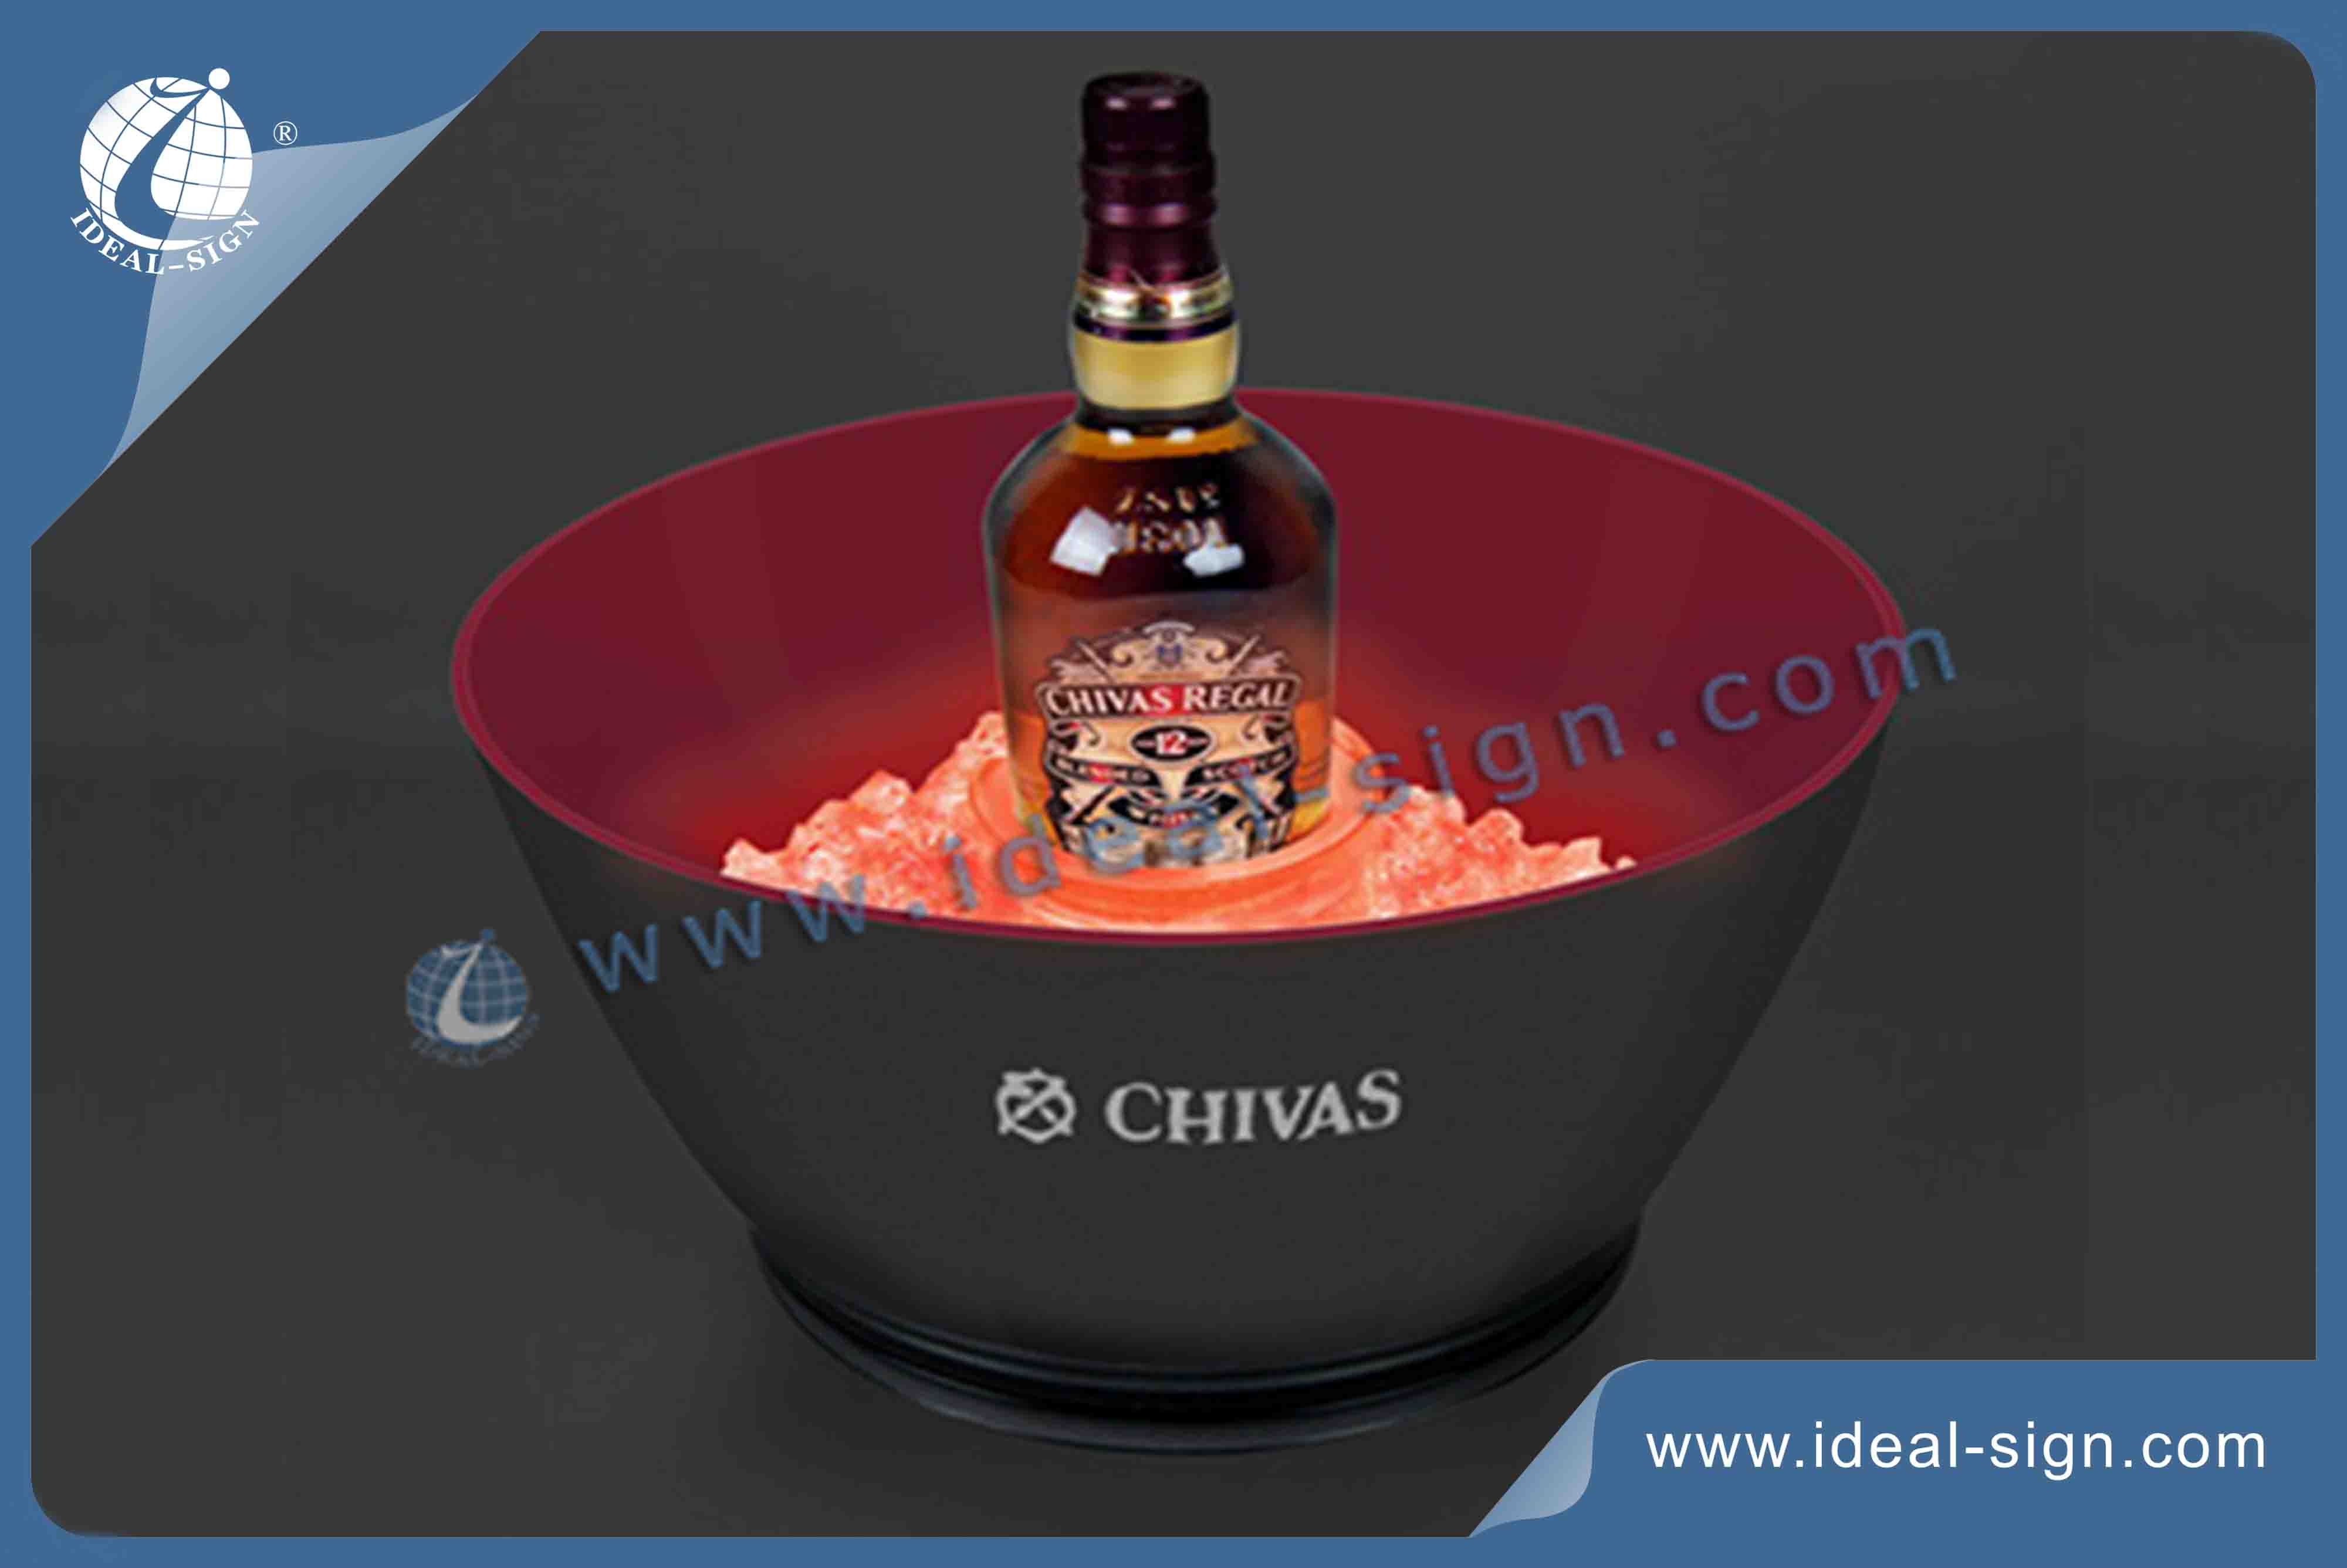 Customized LED Lighted Ice Bucket for Wine for Advertising and Brand Promotion